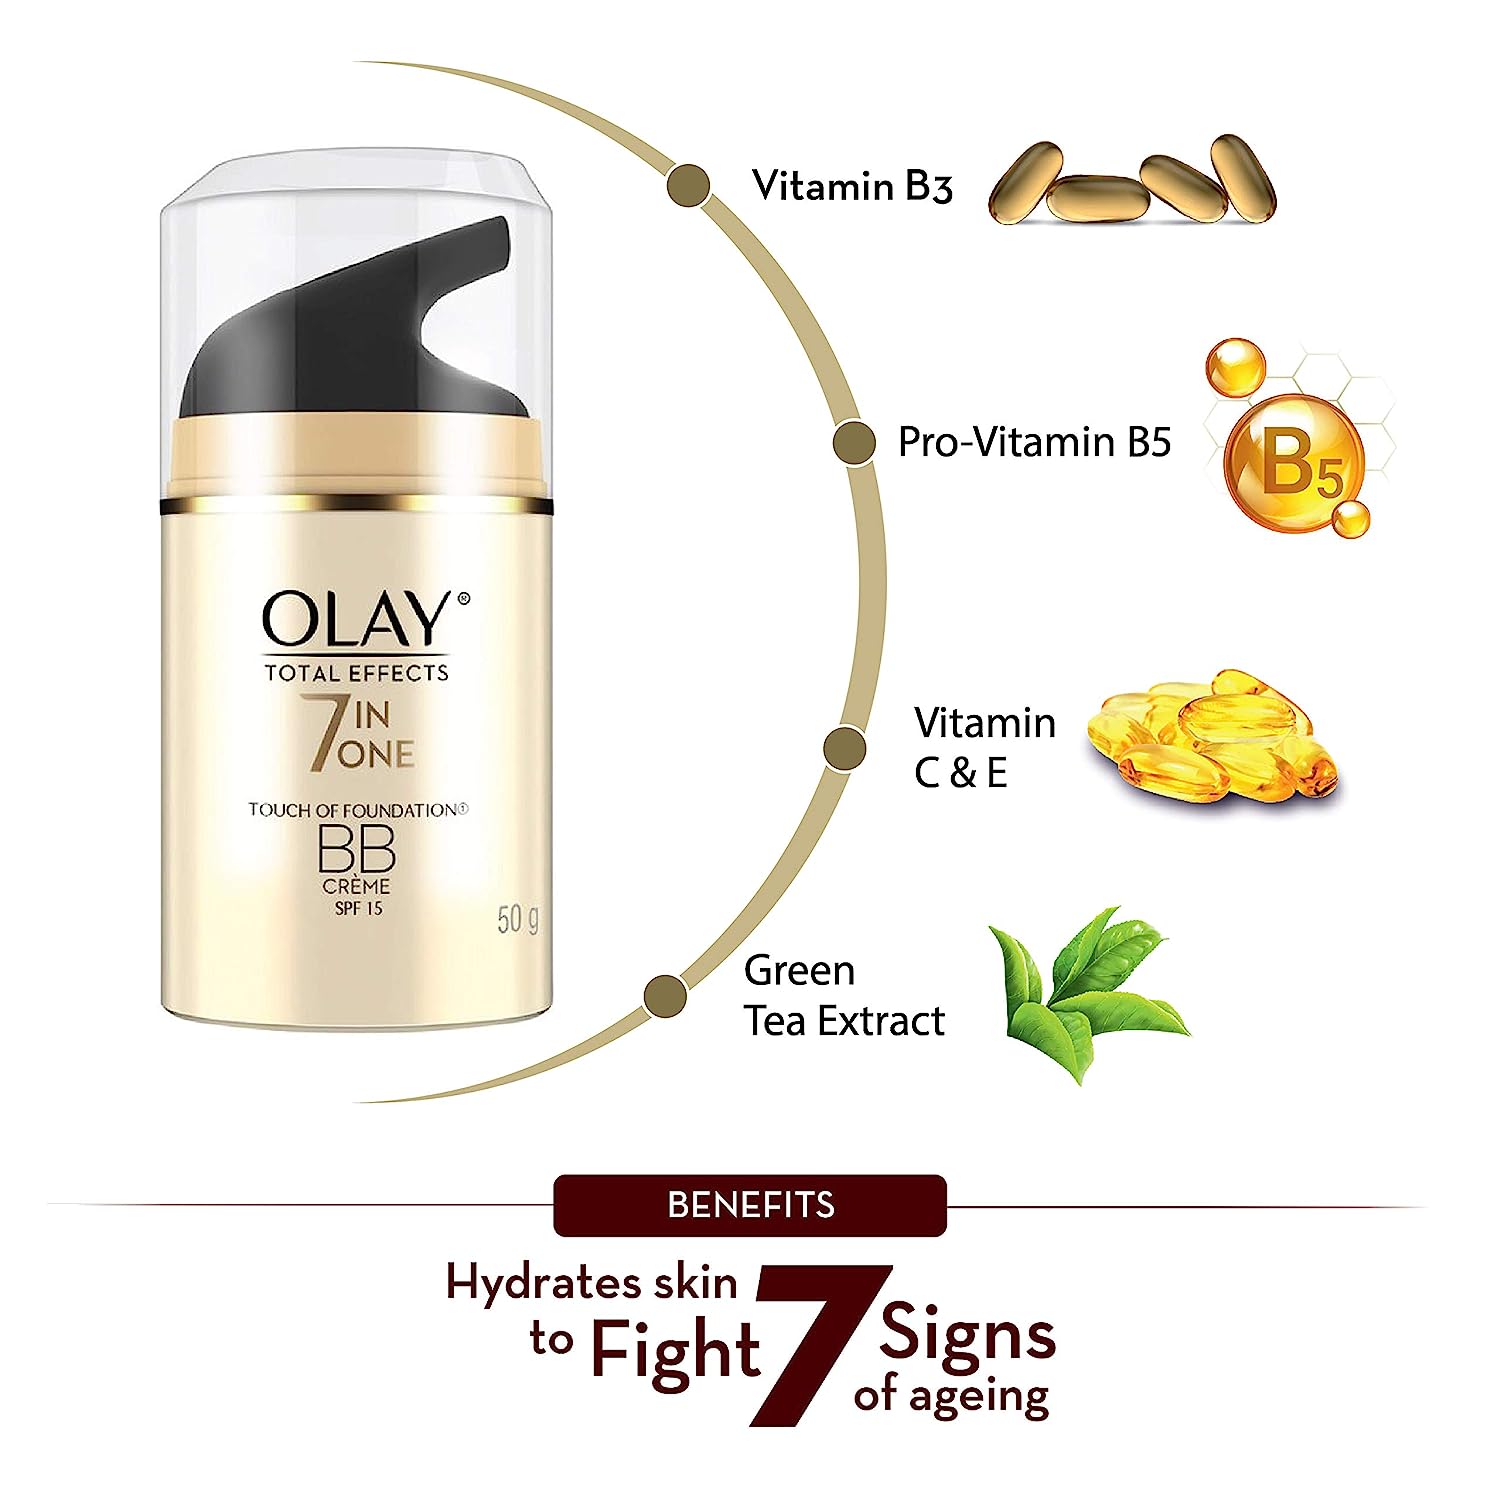 Olay Day Cream Total Effects 7 in 1 BB Cream SPF 15, 50g